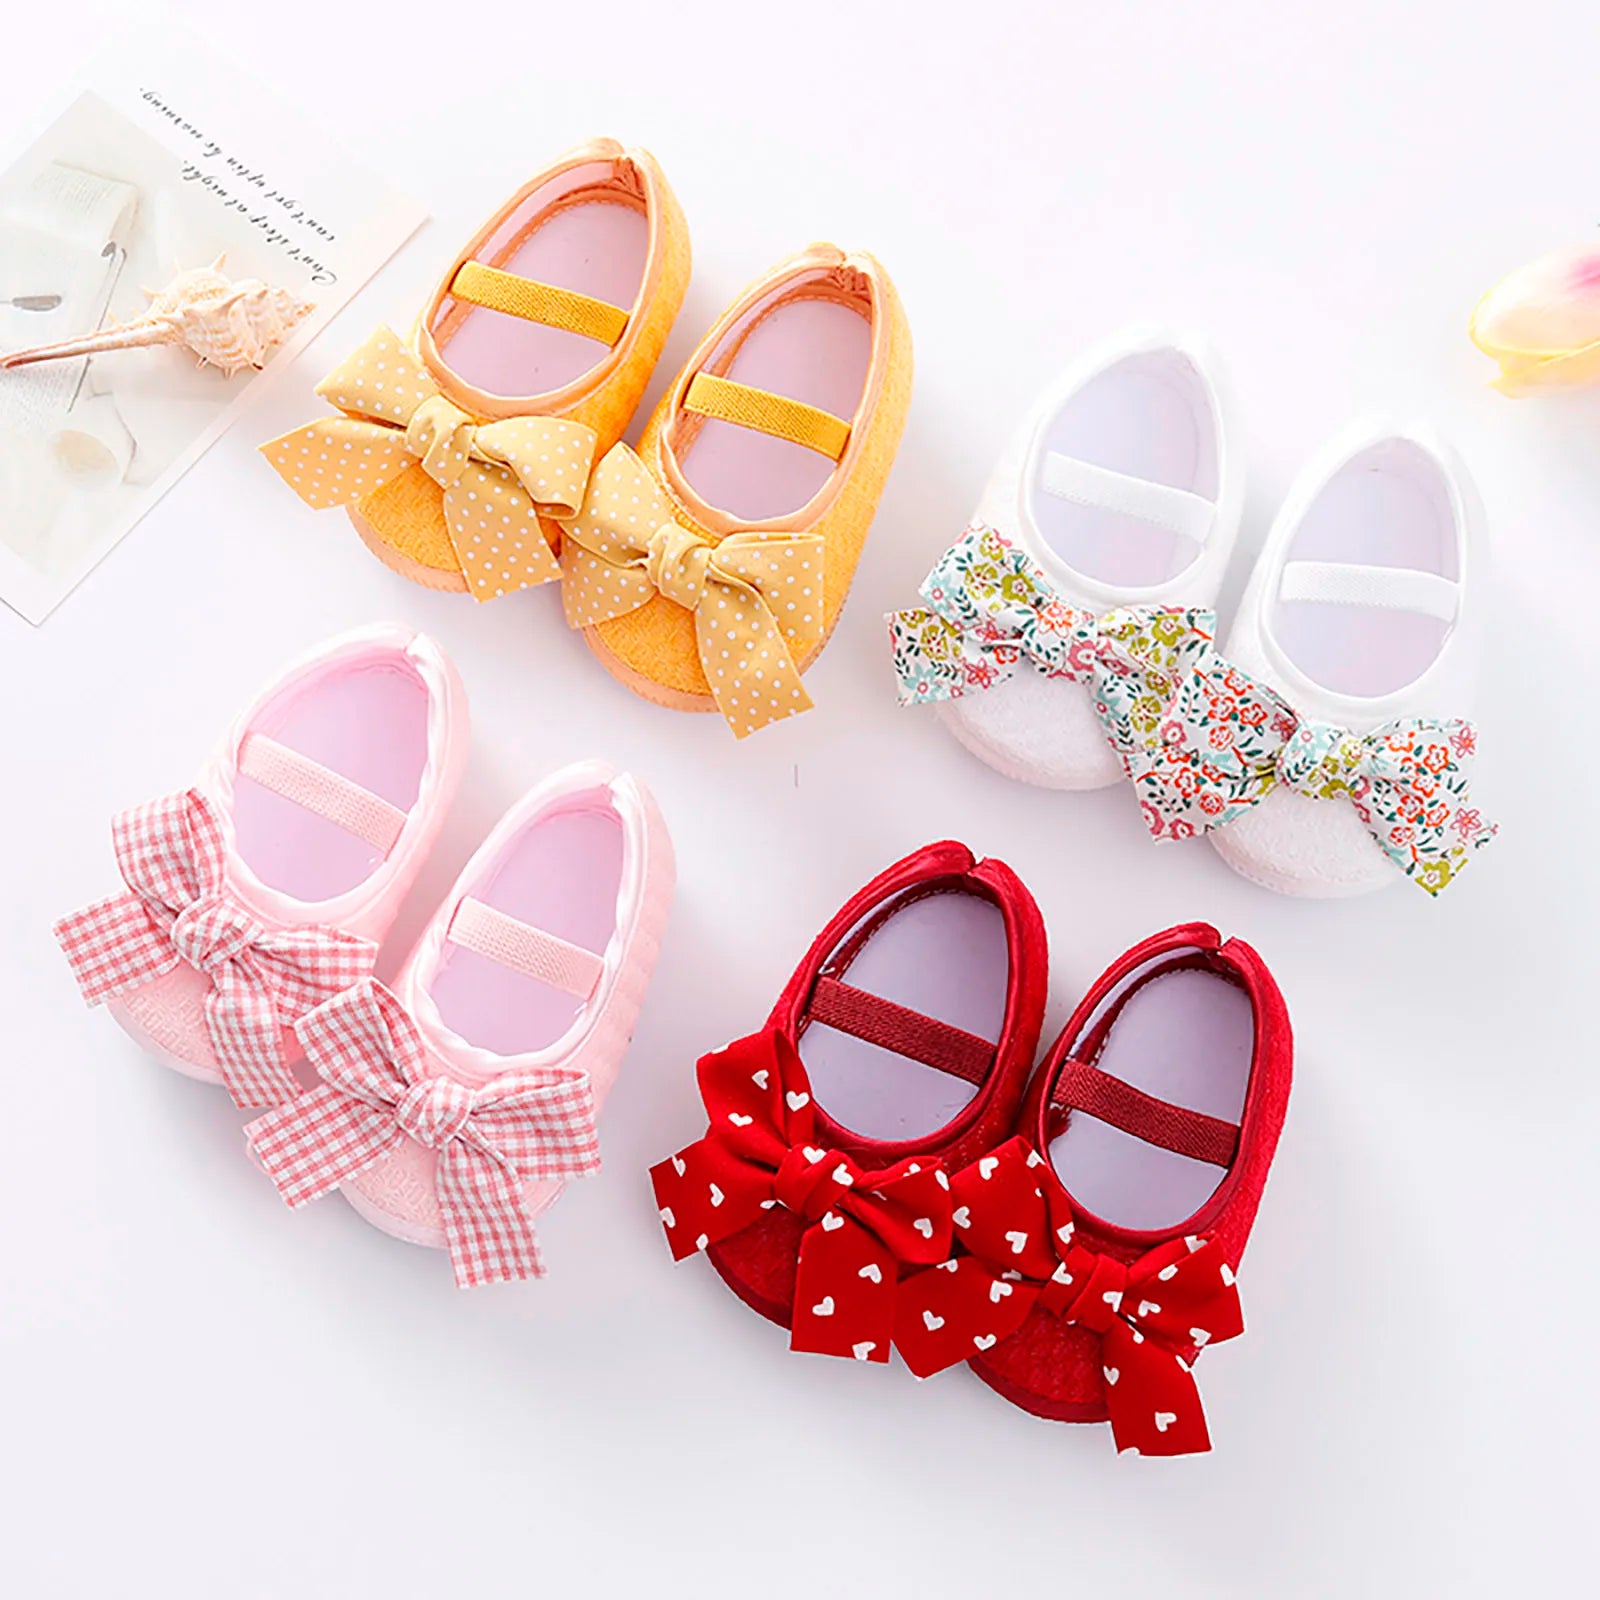 New Baby Girls First Walkers Soft Toddler Shoes Infant Toddler Walkers Shoes Bowknot Casual Princess Shoes кроссовки детские